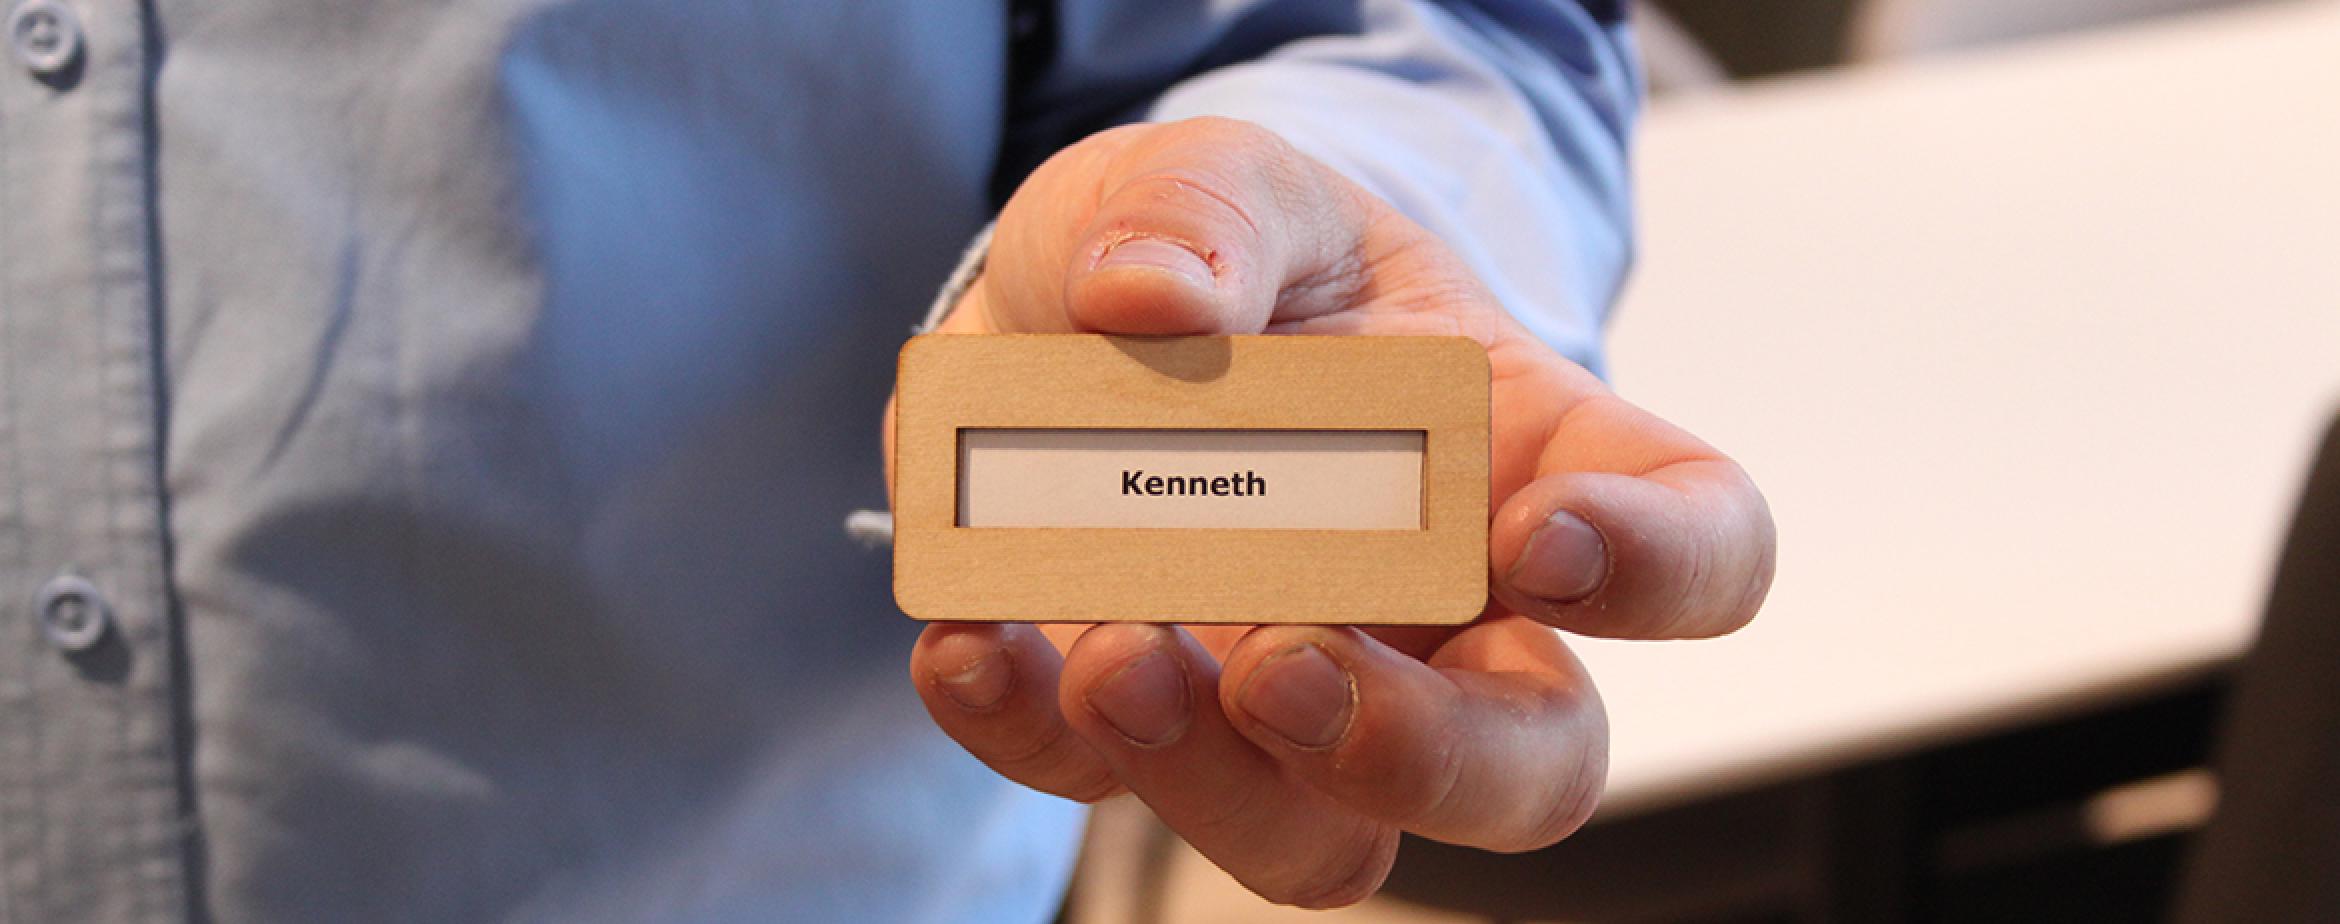 New wooden name tag